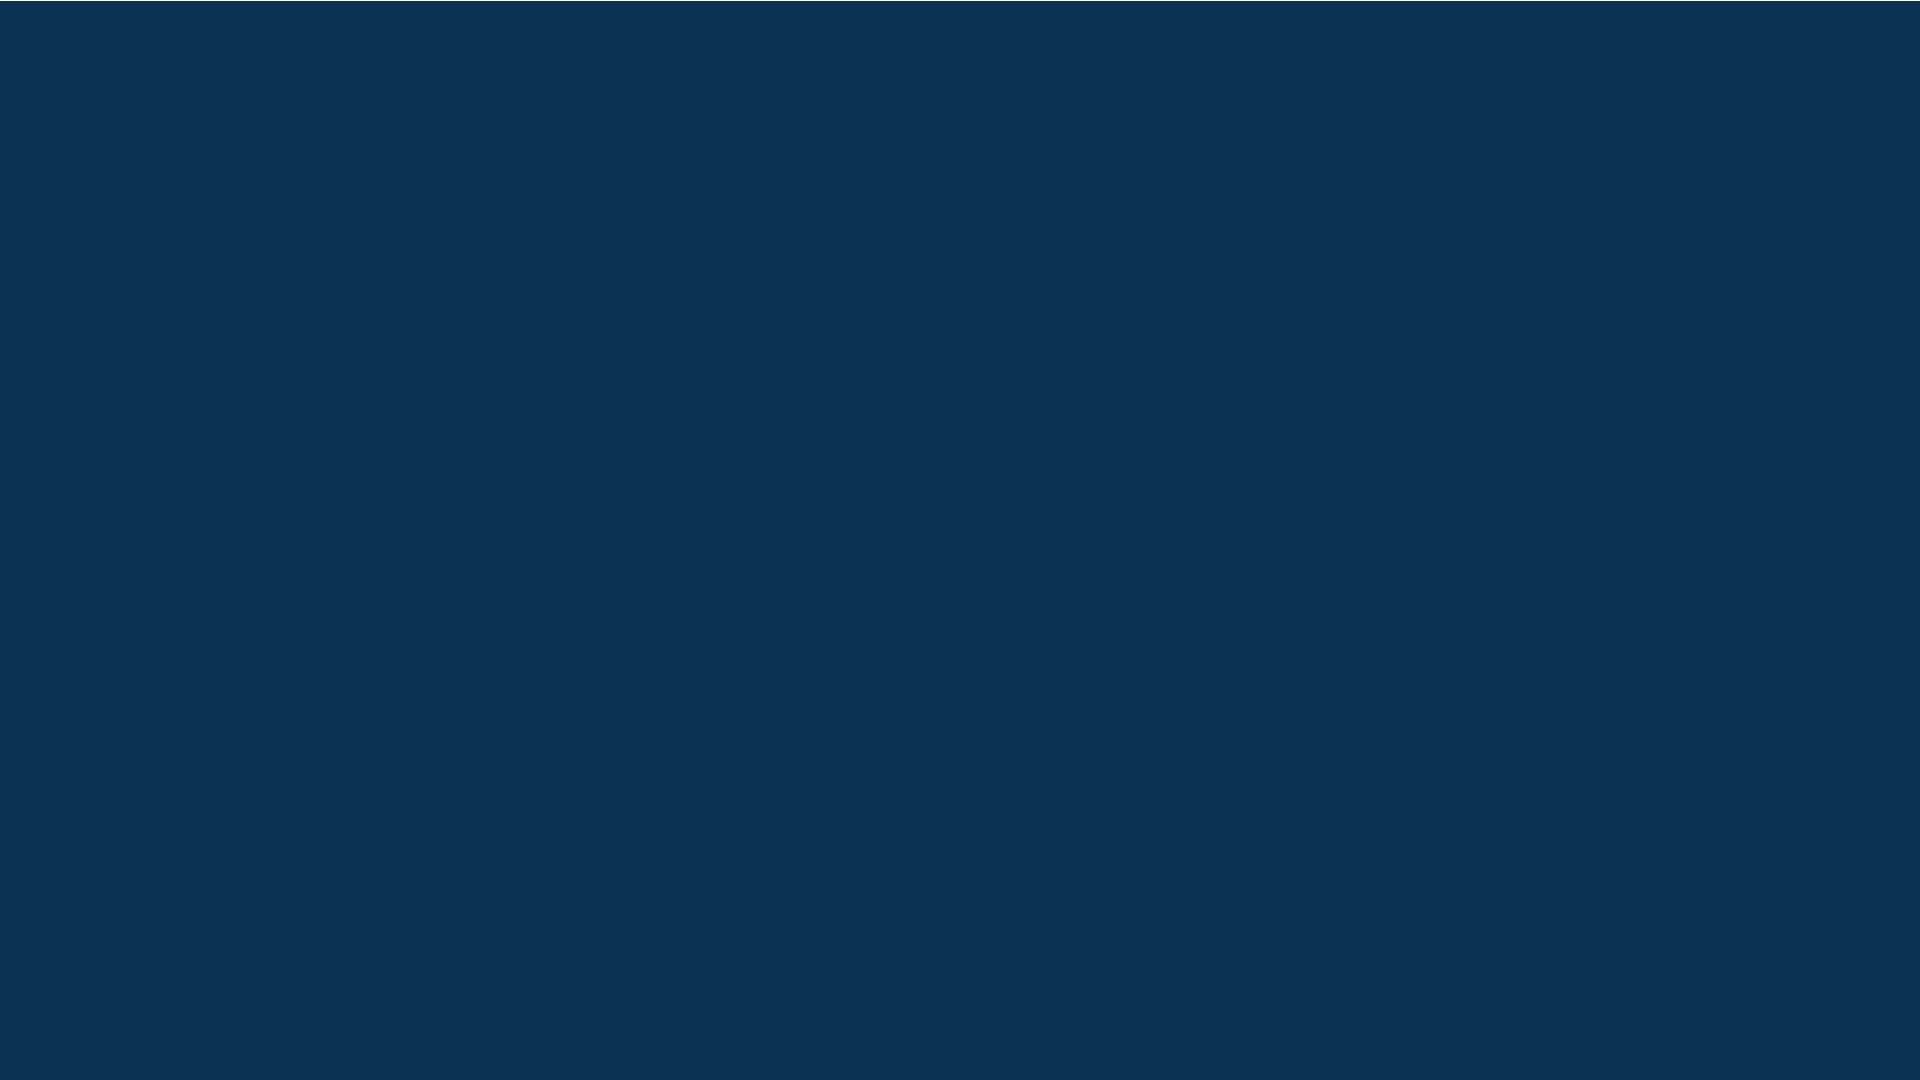 Prussian Blue Solid Color Background